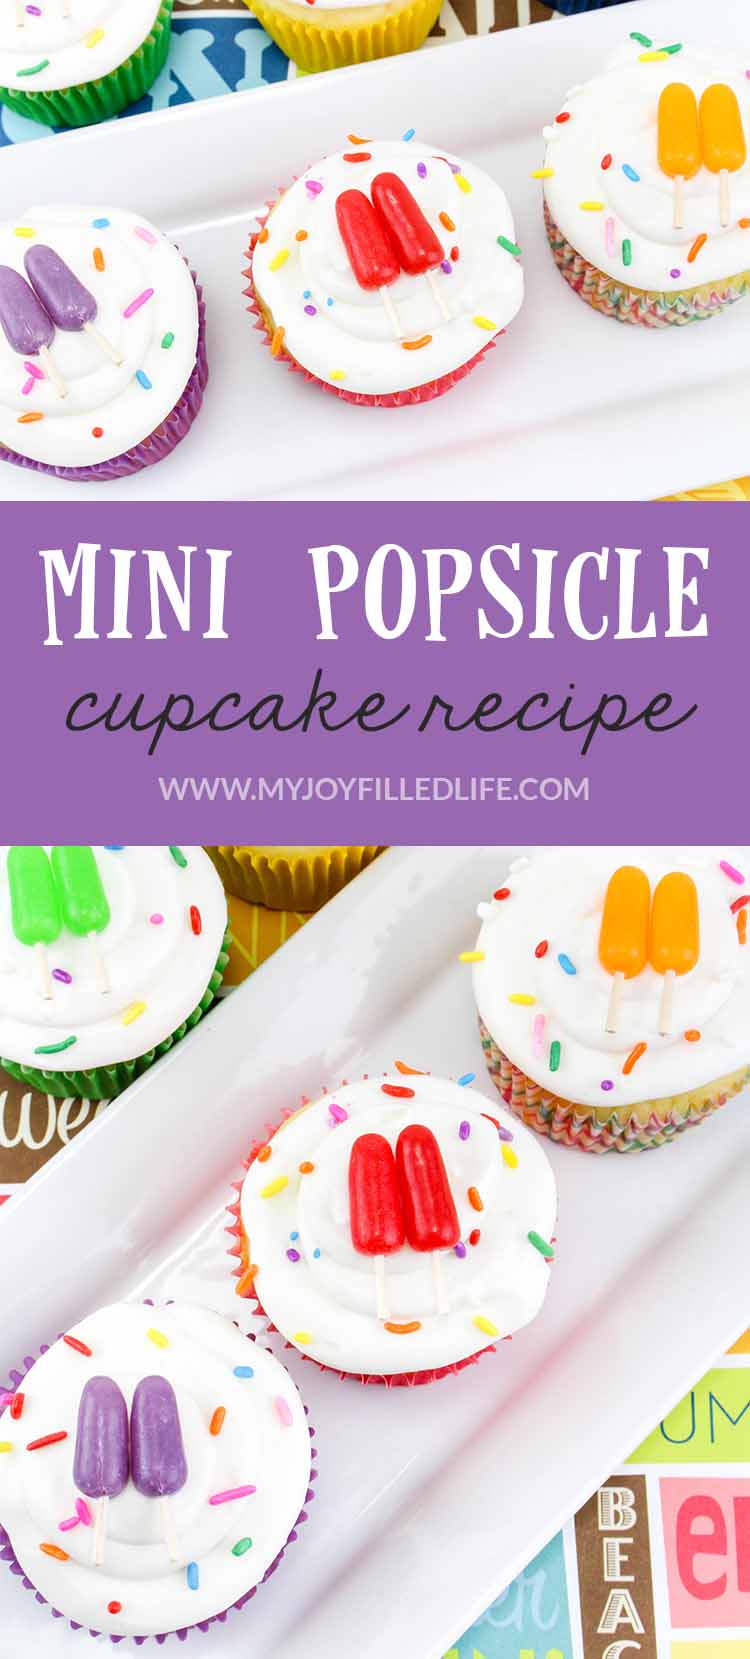 These popsicle cupcakes are perfect for kids' parties or summer playdates and they are so easy to make! #cupcakes #kidfood #funfood